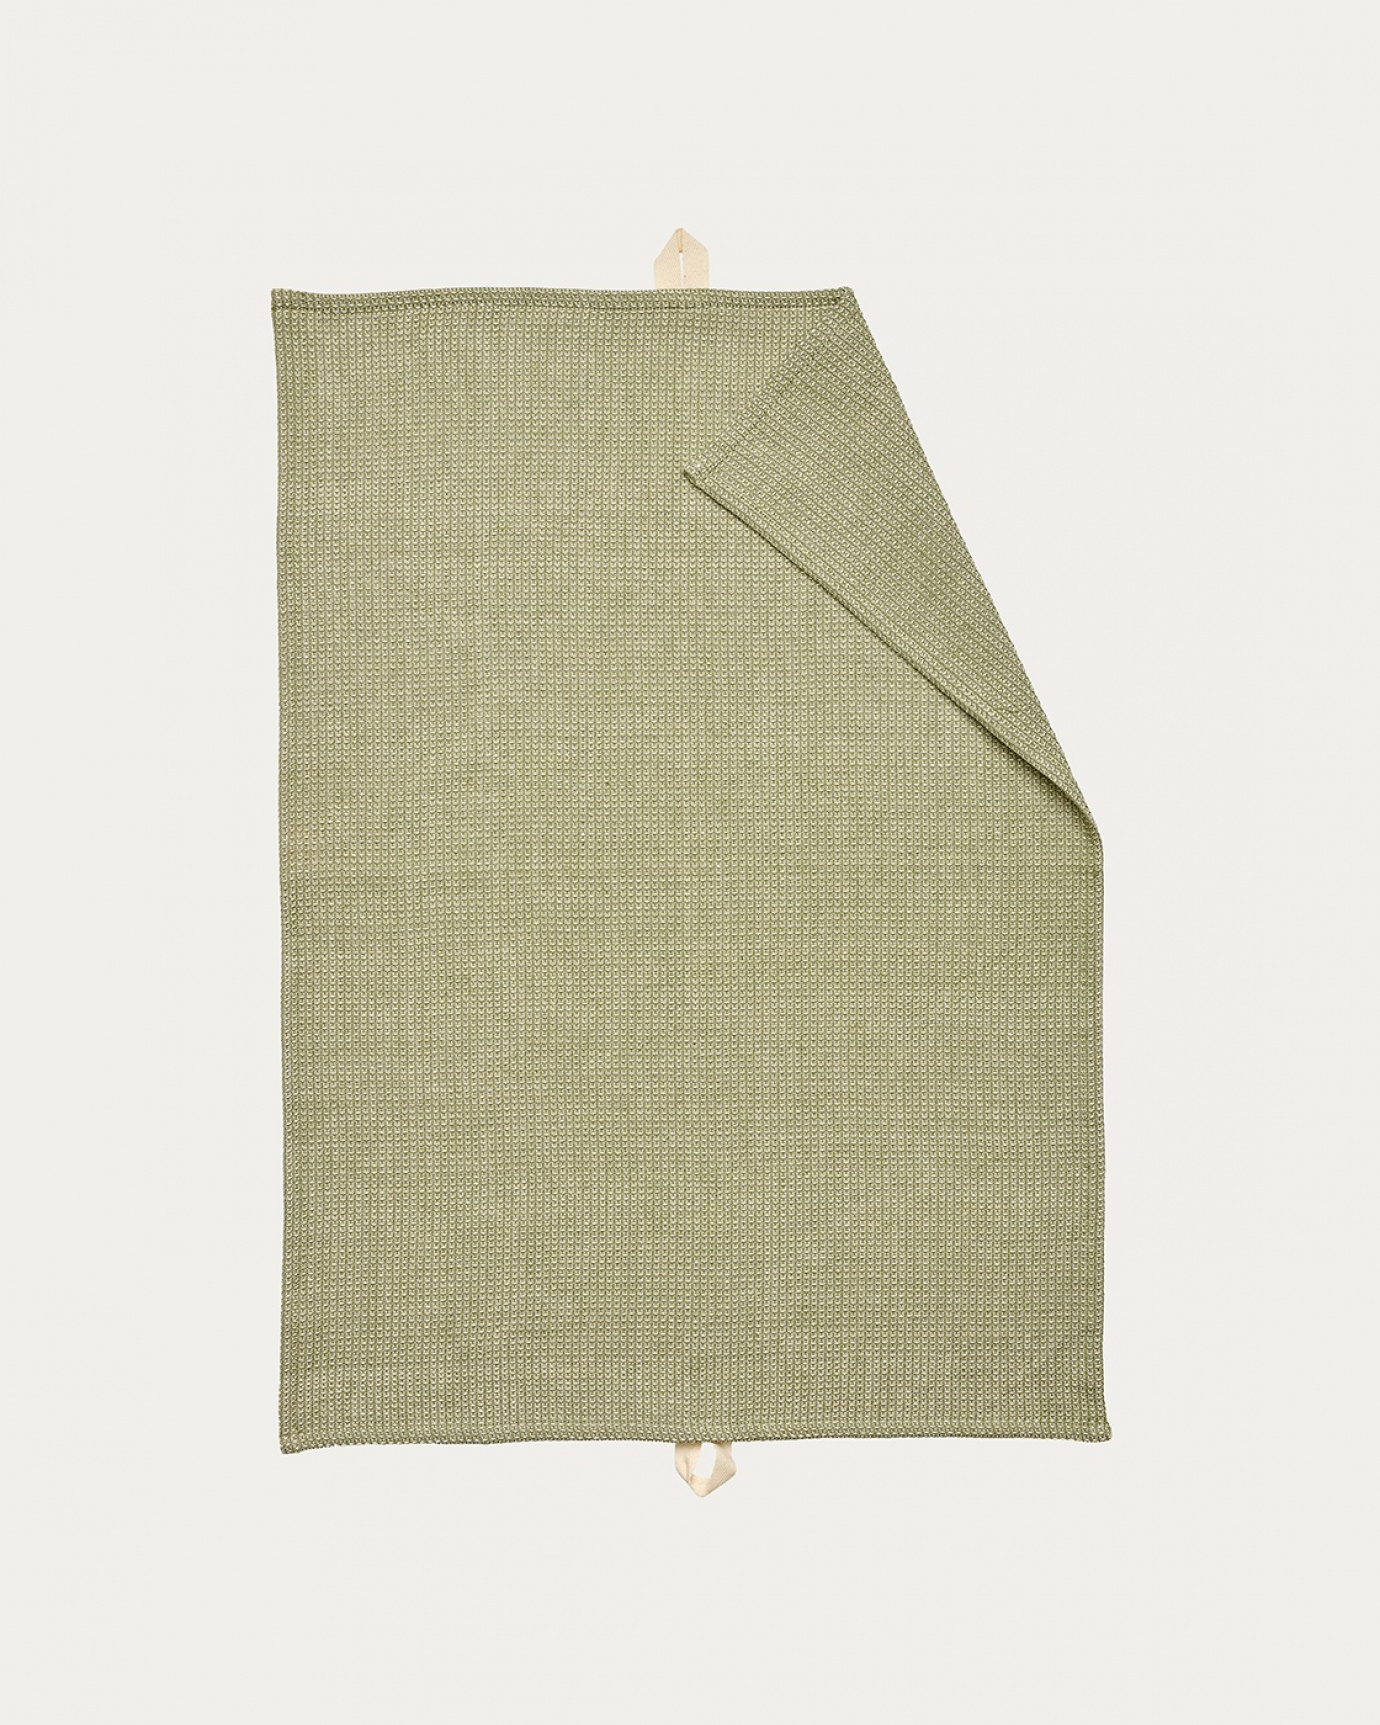 Product image light cypress green AGNES kitchen towel made of soft cotton in a waffle structure from LINUM DESIGN. Size 50x70 cm.